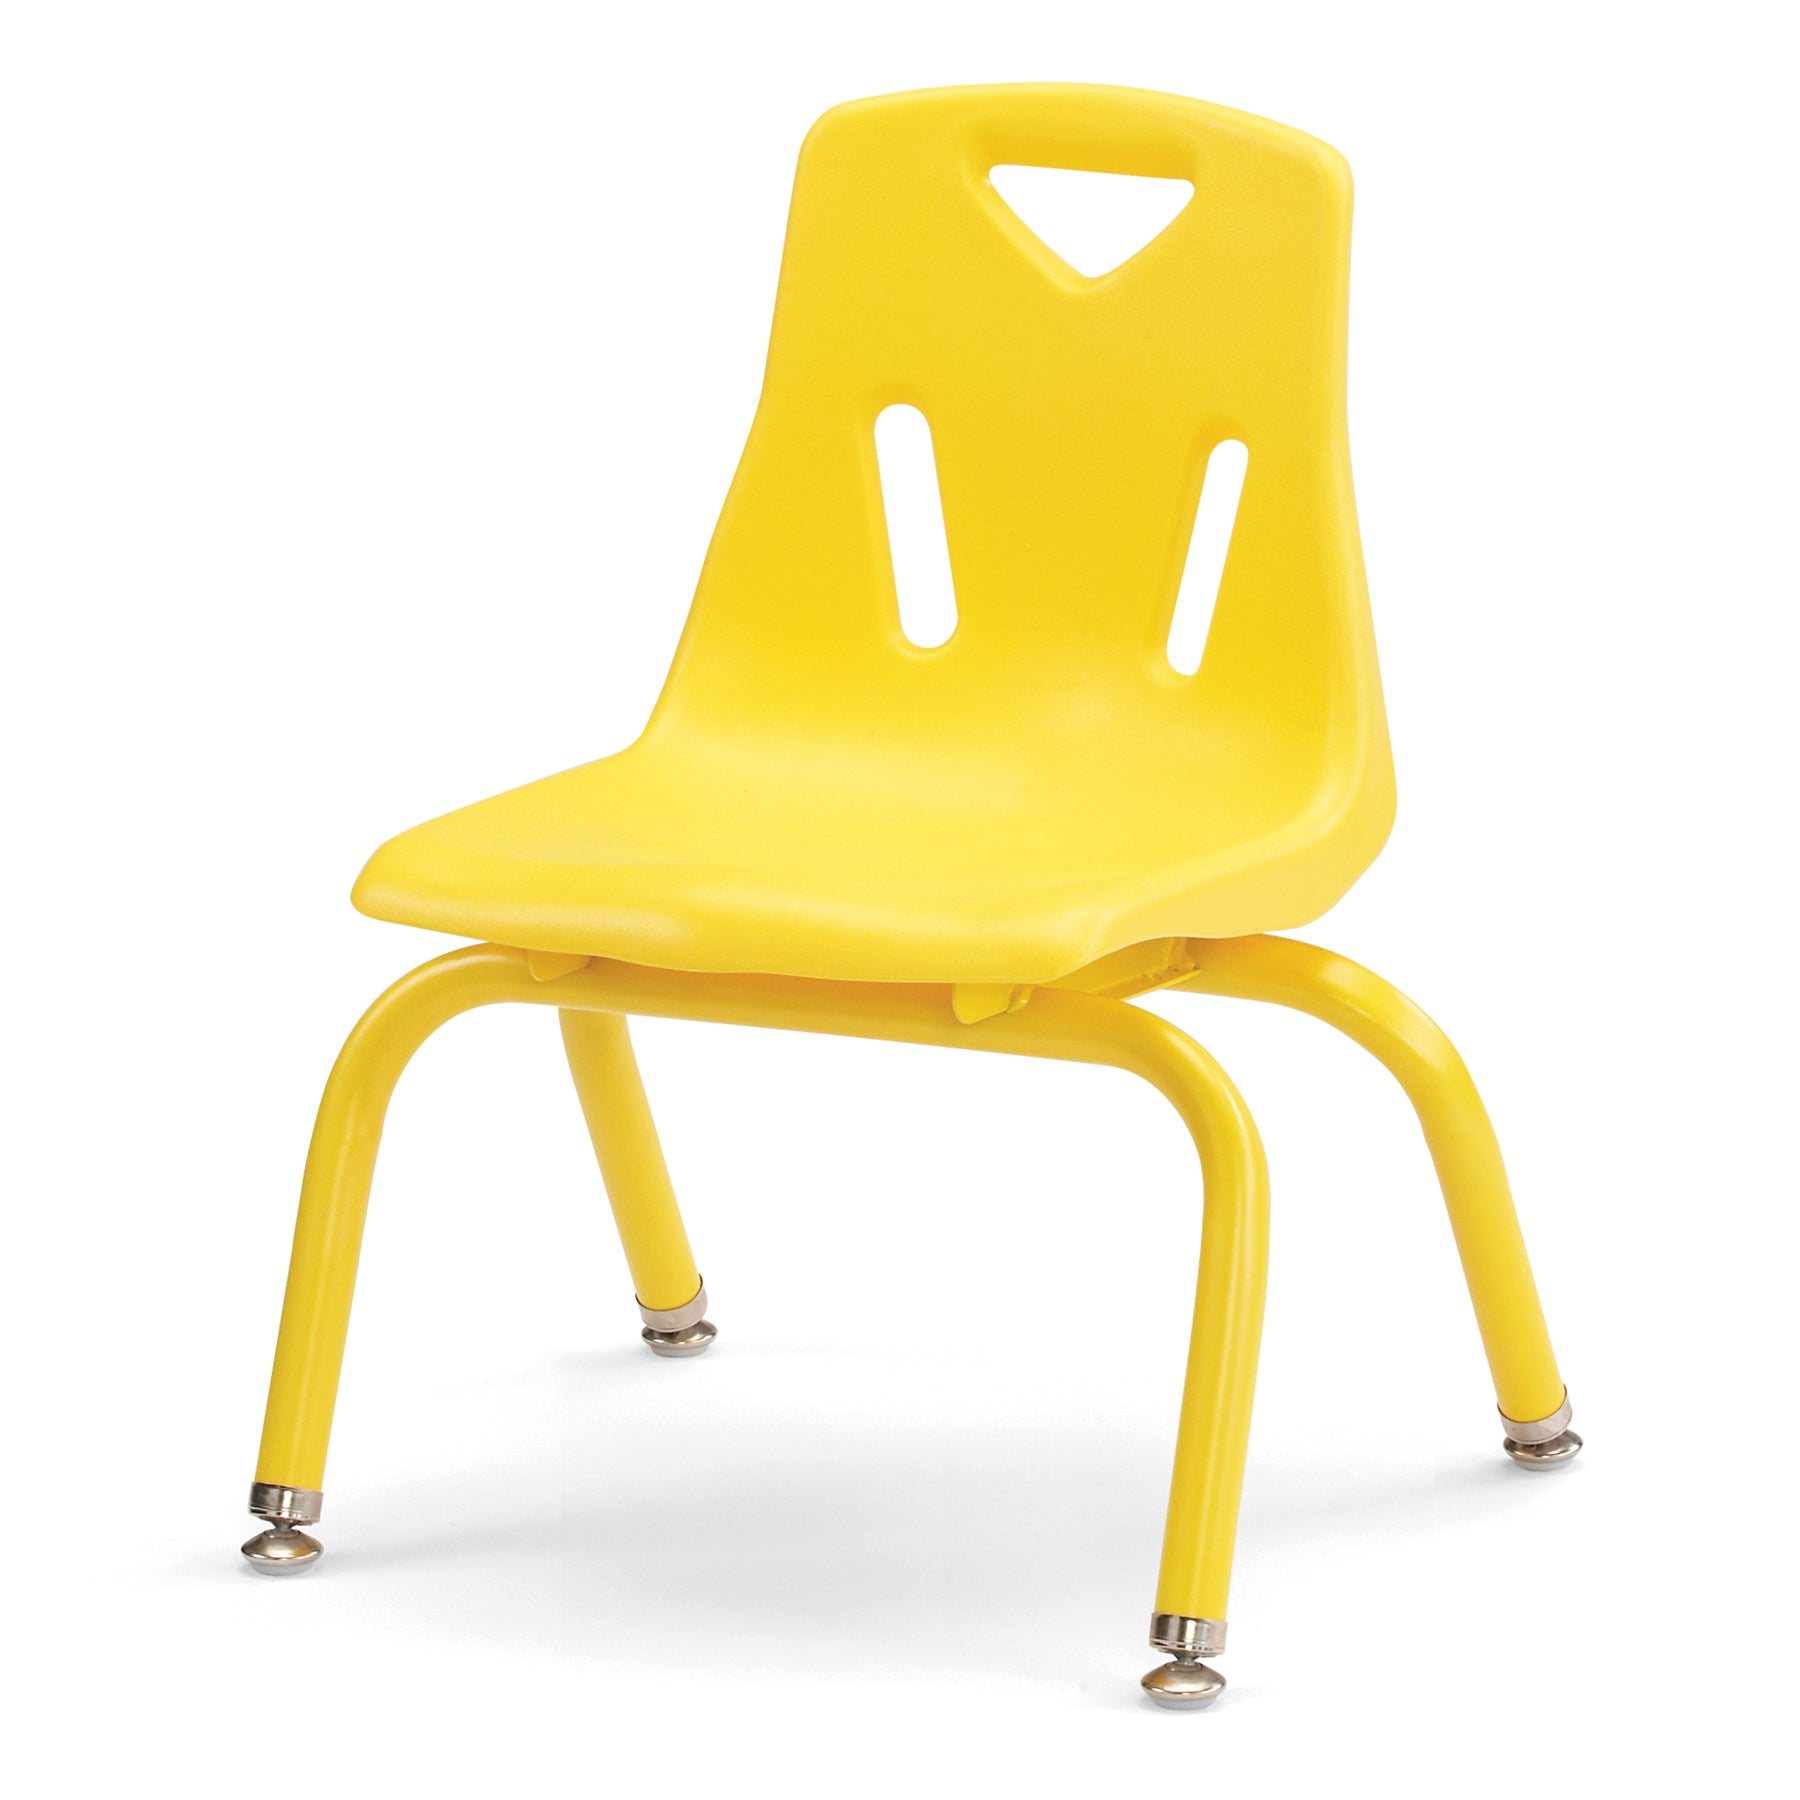 8120JC1007, Berries Stacking Chair with Powder-Coated Legs - 10" Ht - Yellow